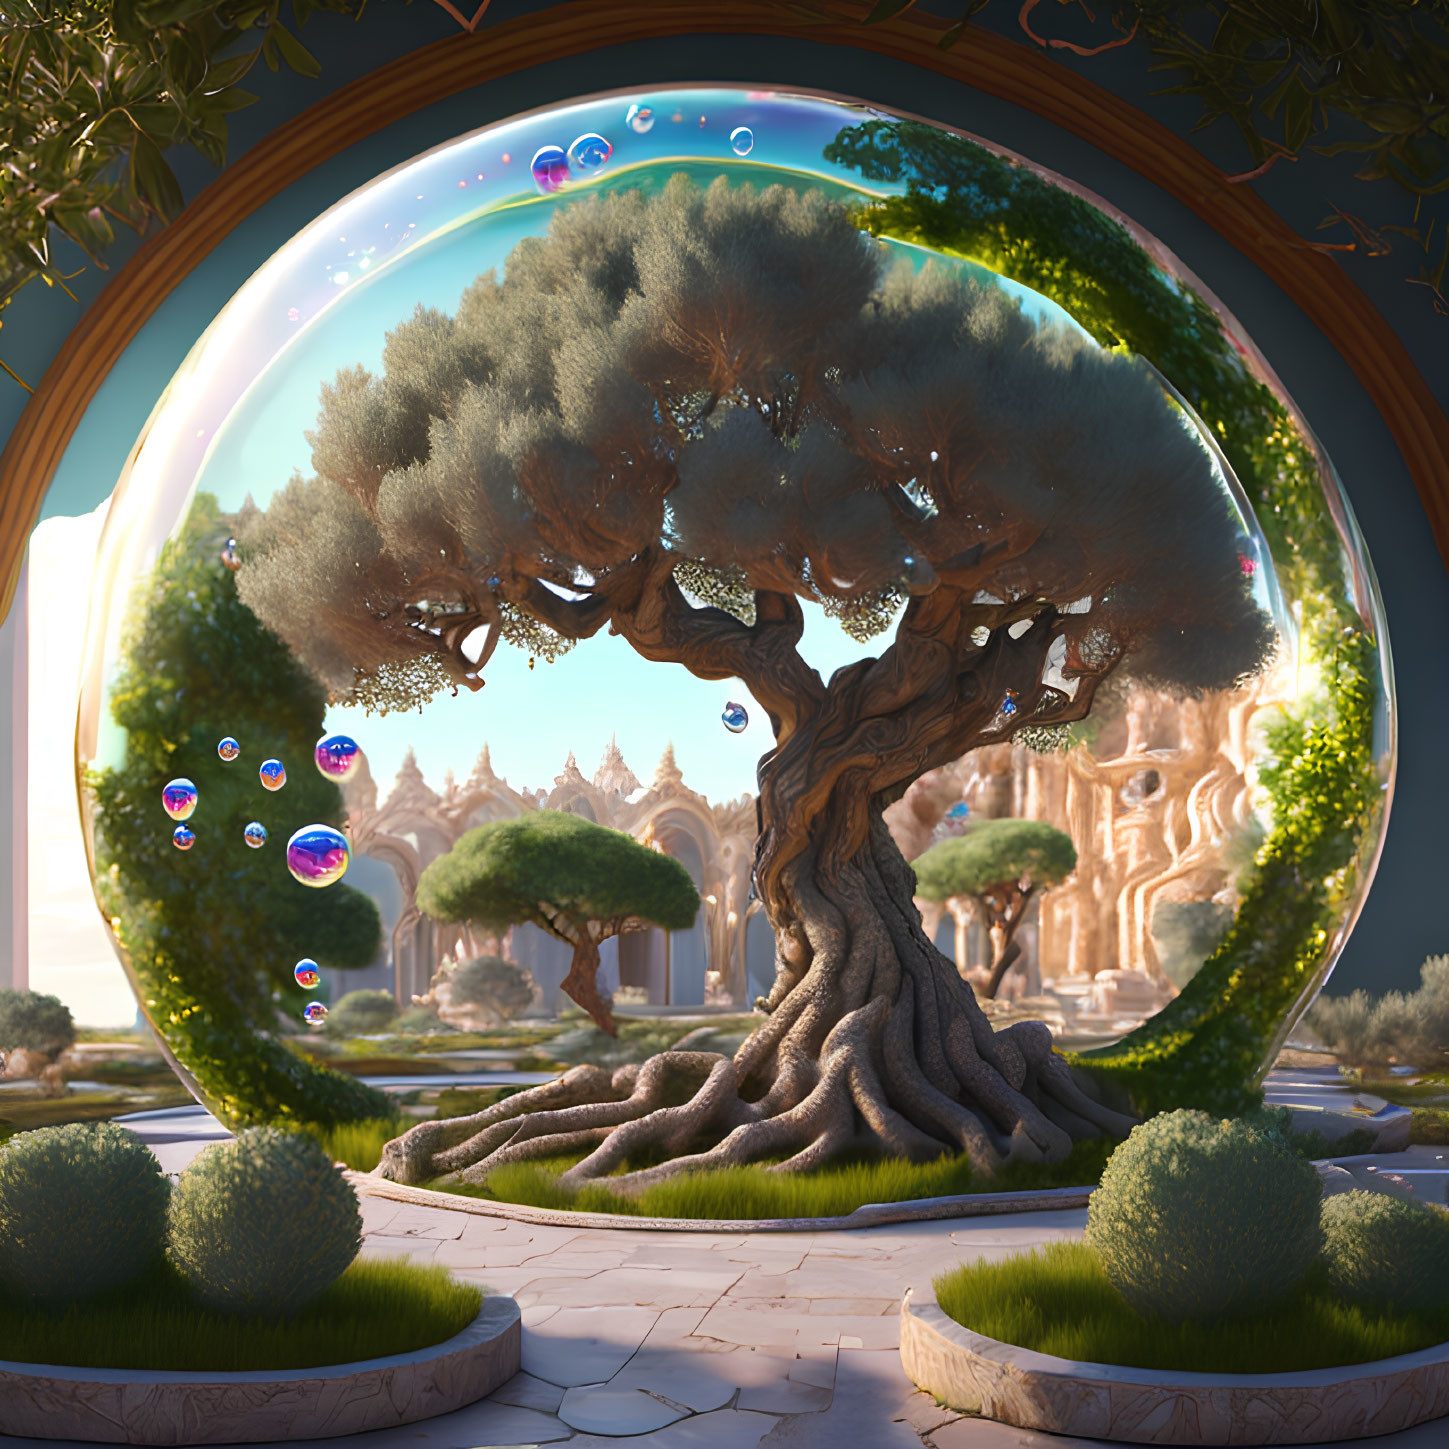 Oversized bonsai tree under dome with soap bubbles and fantasy castle